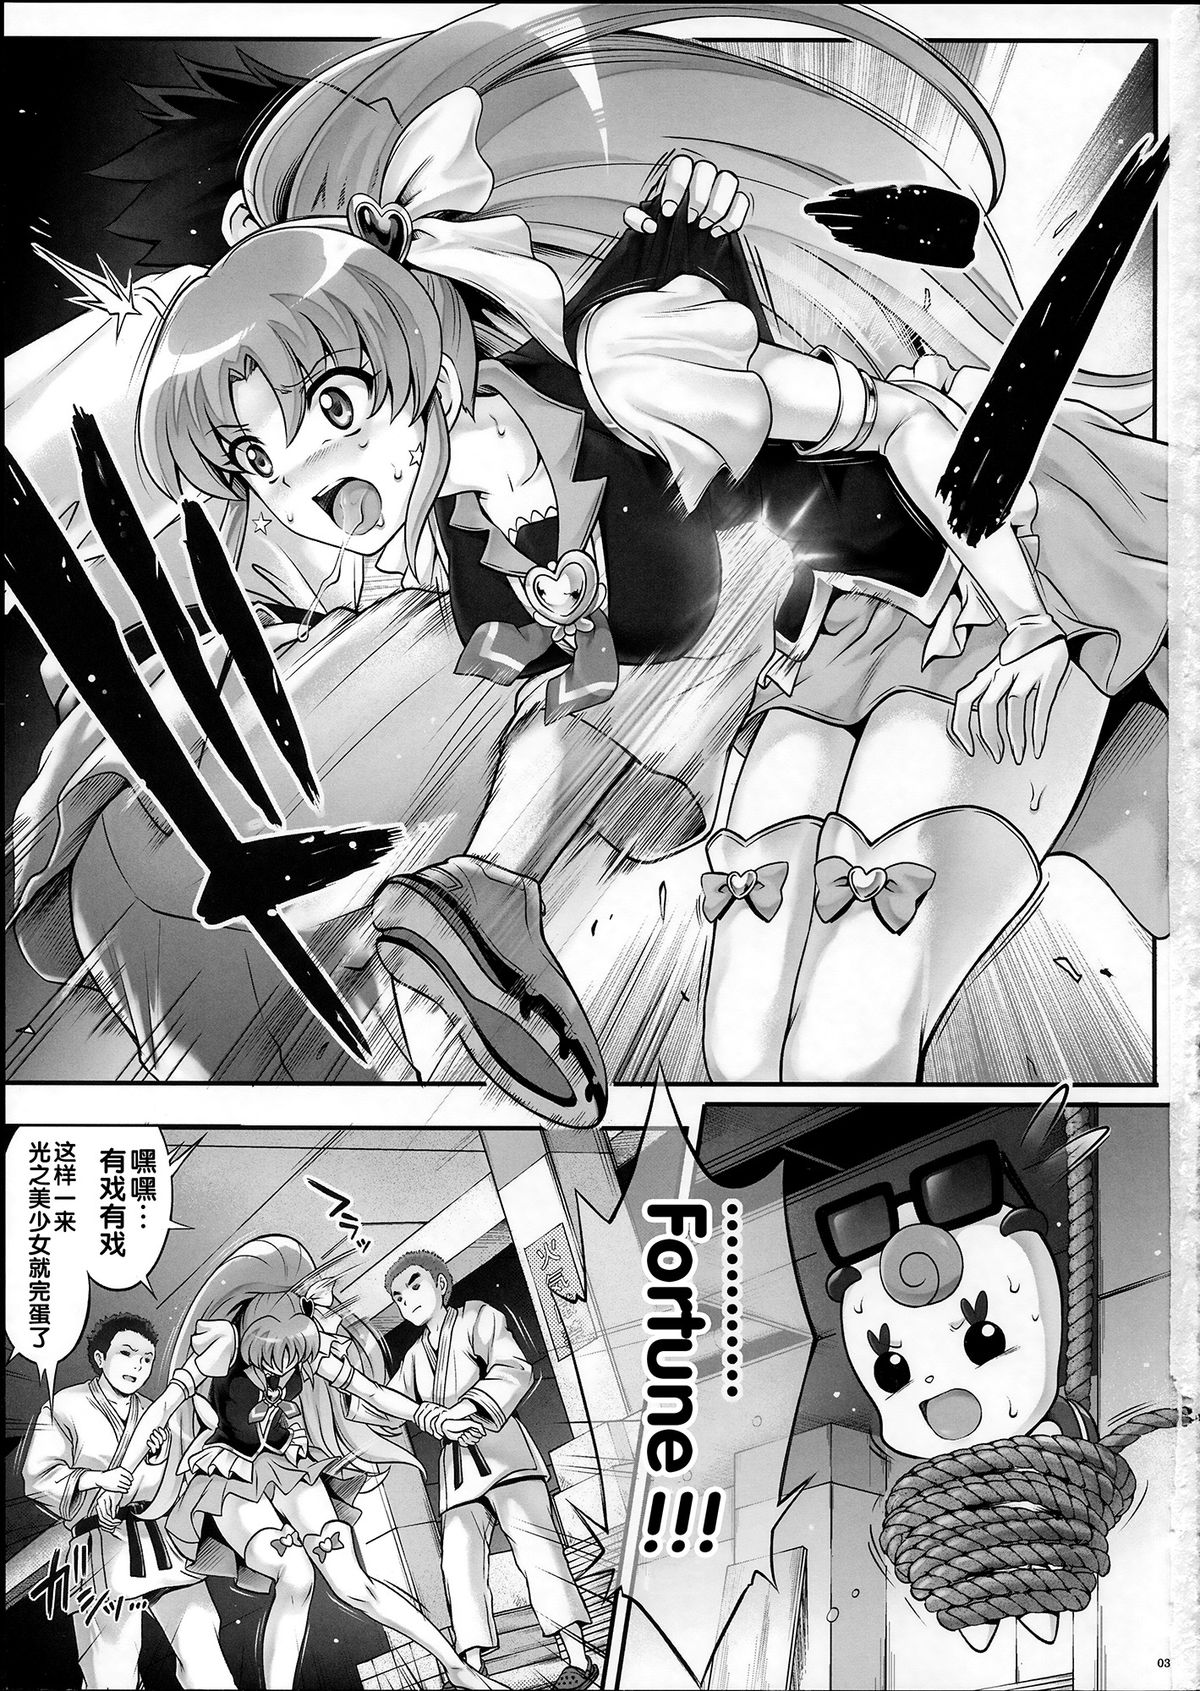 (C86) [Cyclone (Izumi, Reizei)] T-21 Sai Aaaark (HappinessCharge Precure!) [Chinese] page 3 full